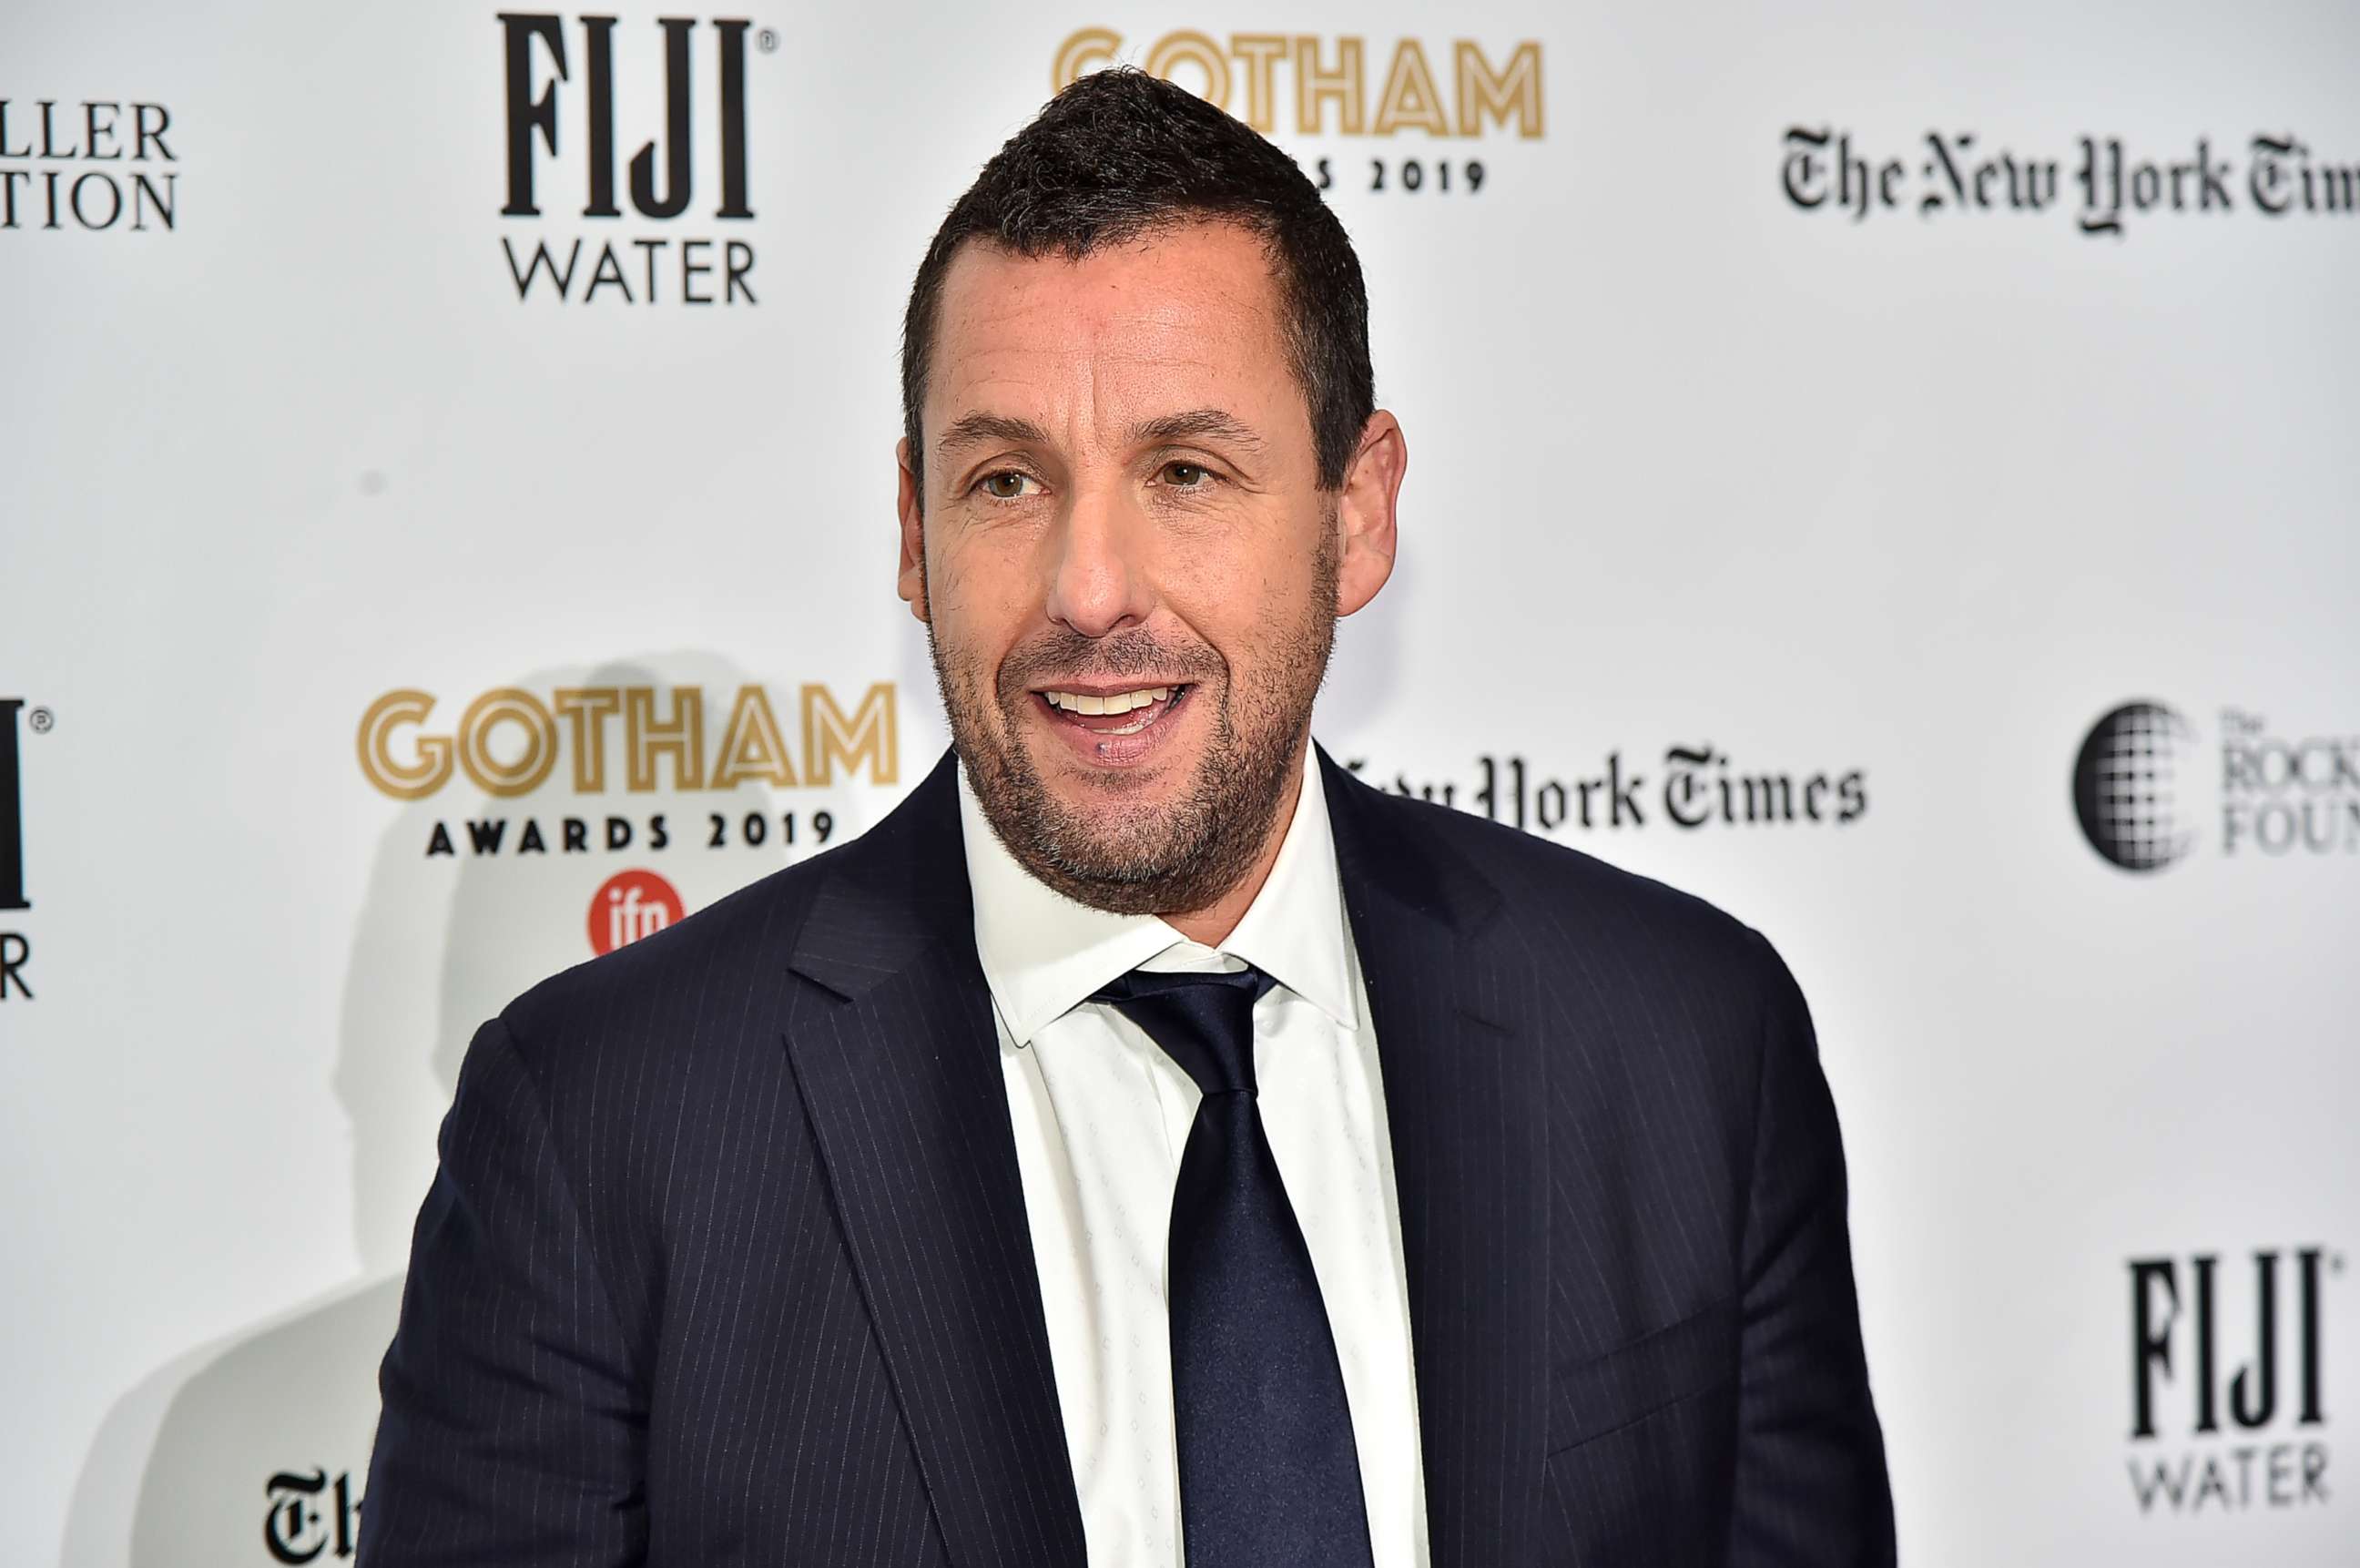 PHOTO: Adam Sandler attends the IFP's 29th Annual Gotham Independent Film Awards at Cipriani Wall Street, Dec. 2, 2019, in New York City.